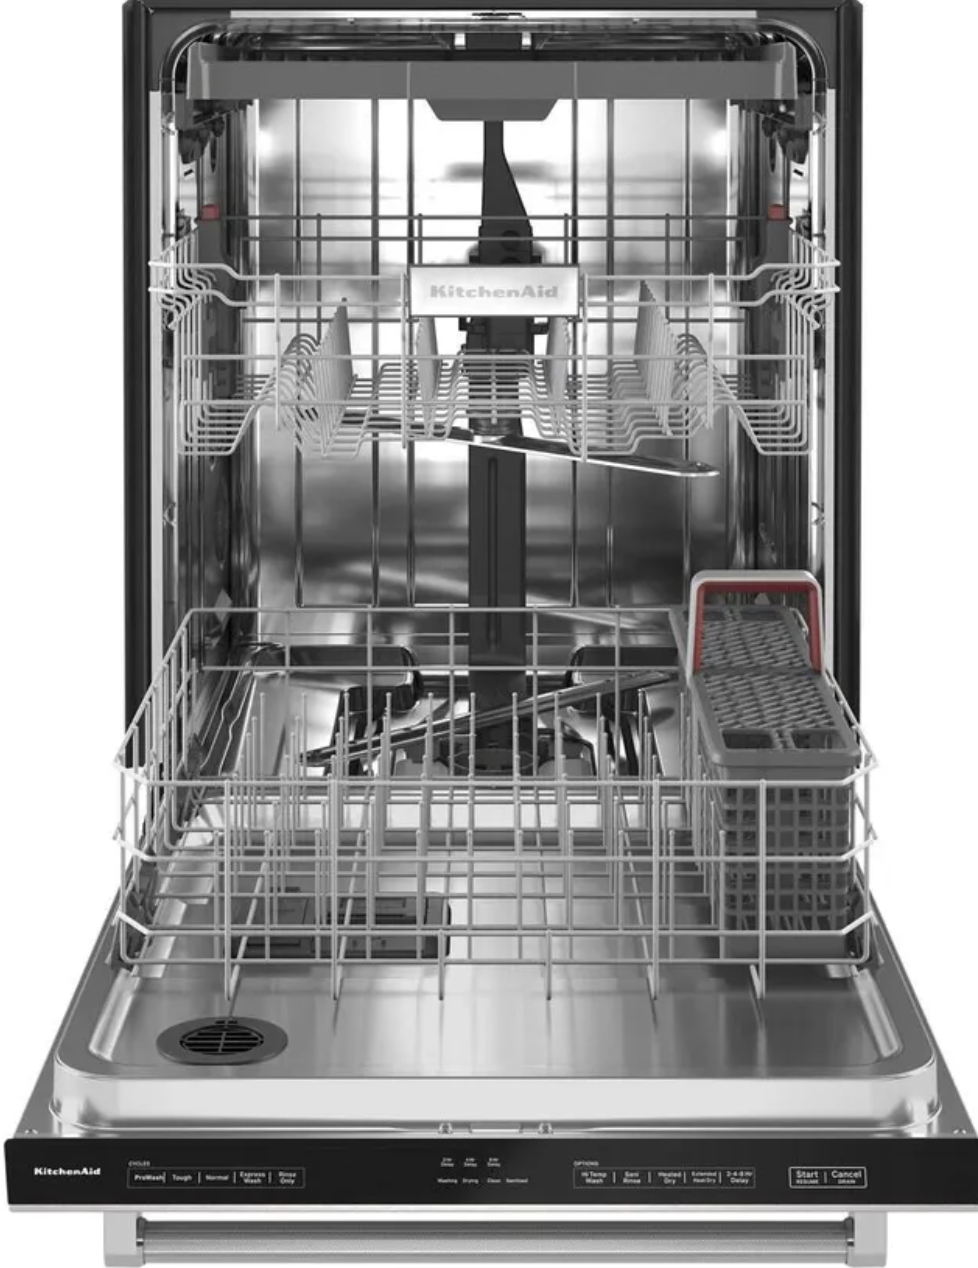 Which Dishwashers Dry Your Dishes Best?